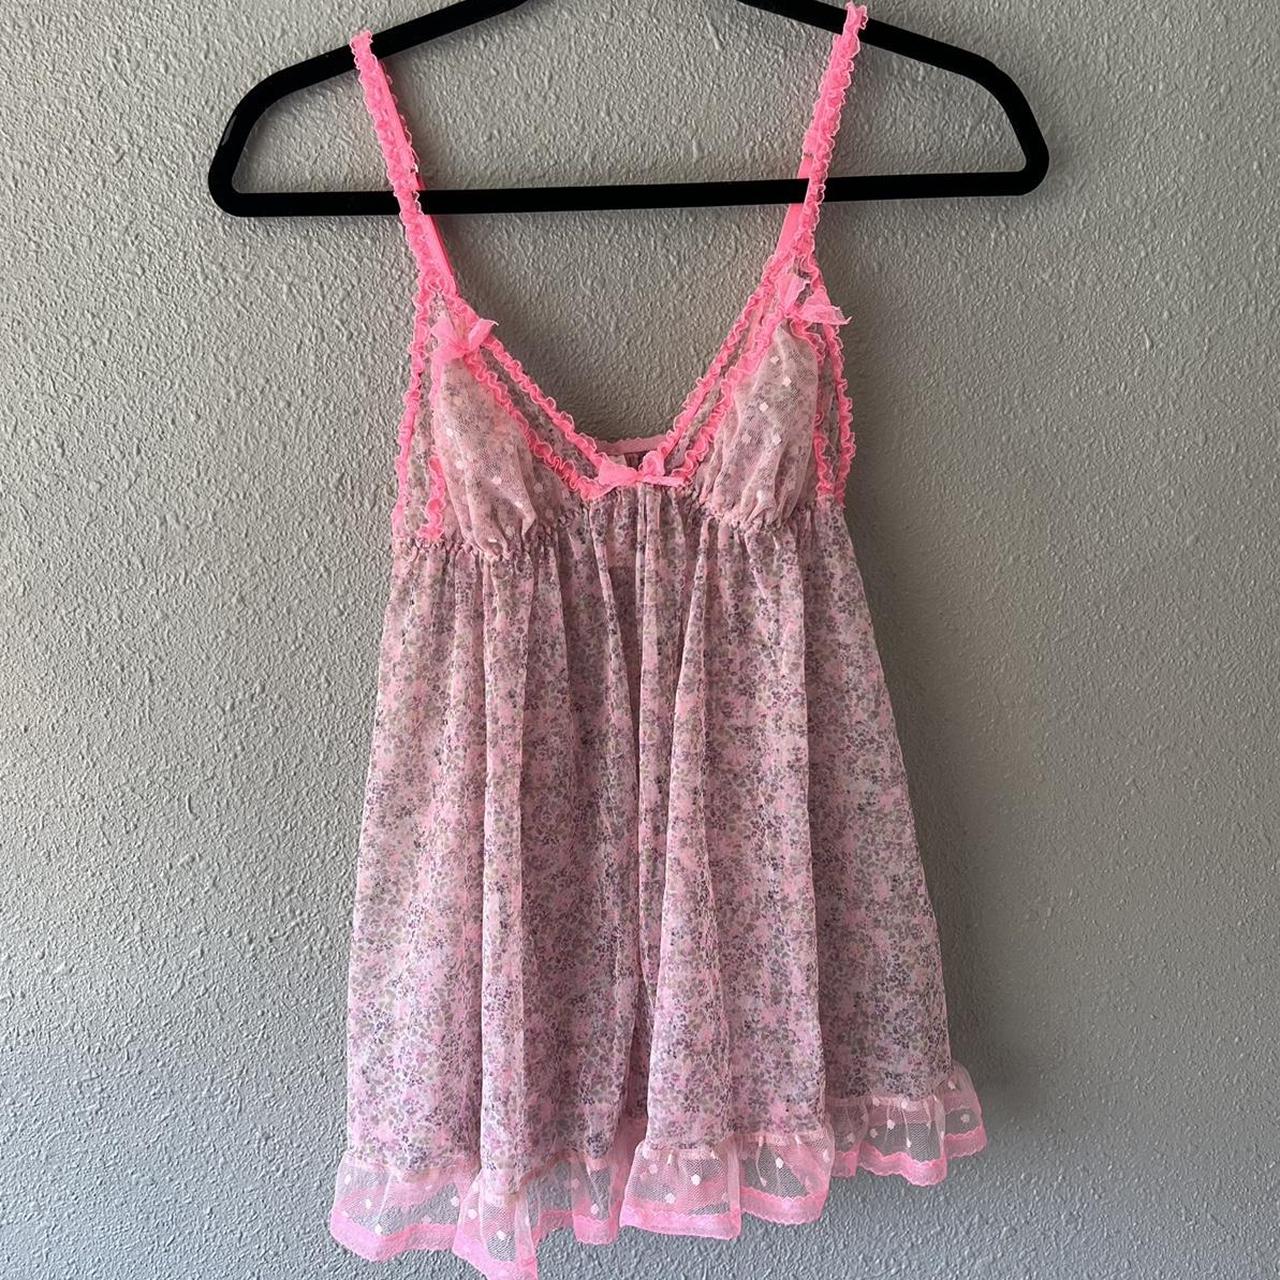 Selling this Victoria’s Secret pink and purple... - Depop